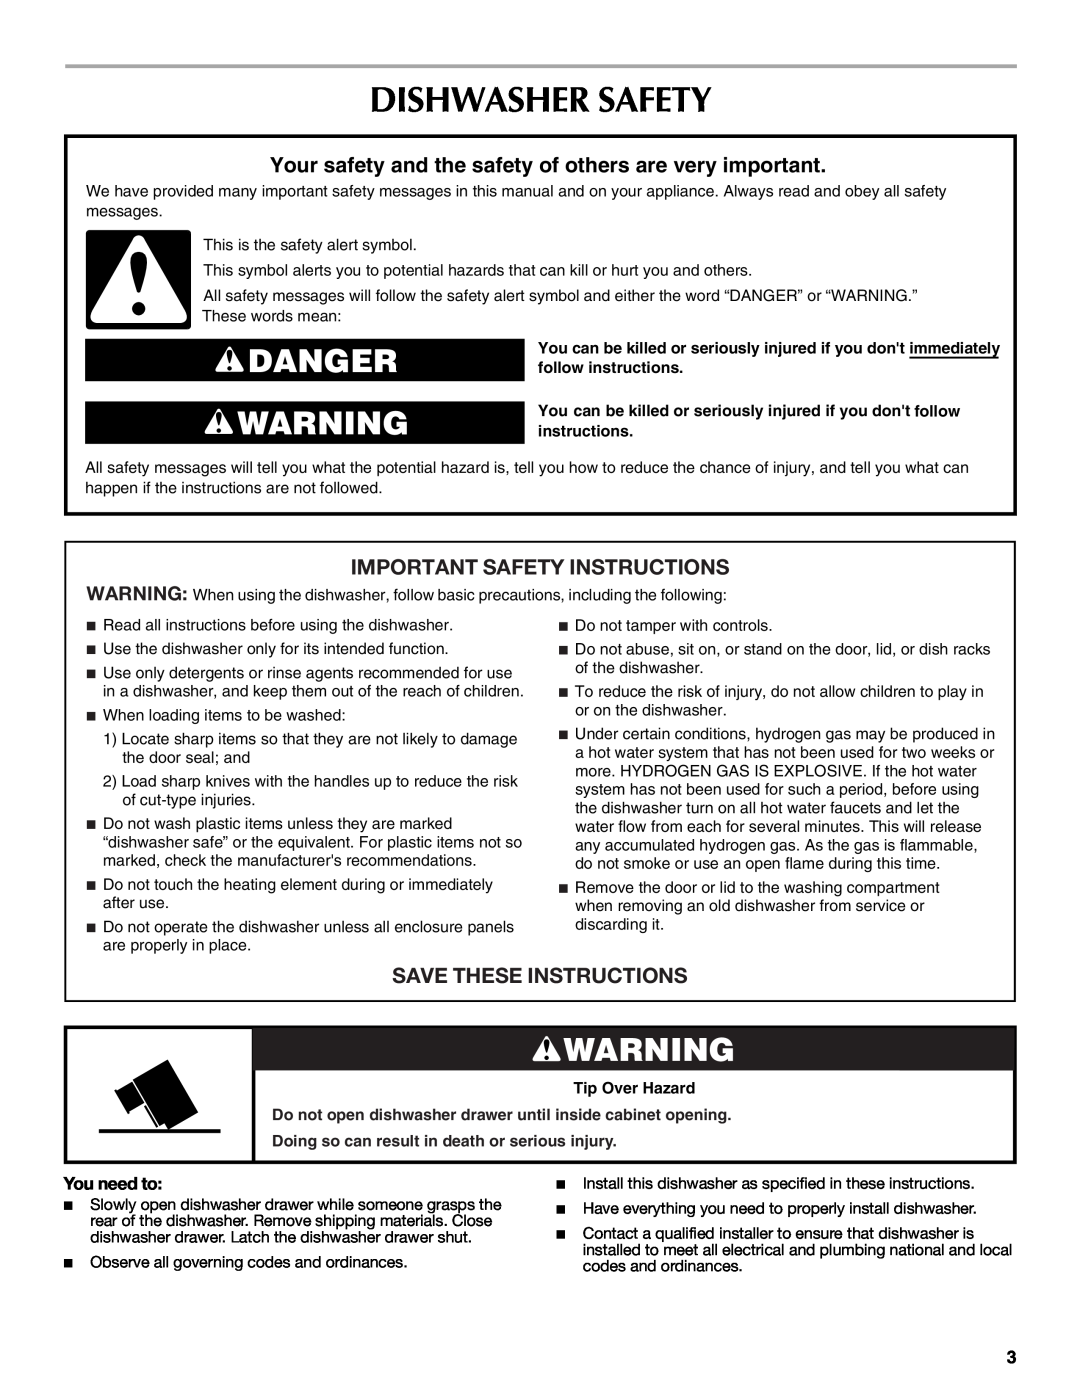 Maytag W10300218A Dishwasher Safety, Danger, Important Safety Instructions, Save These Instructions 